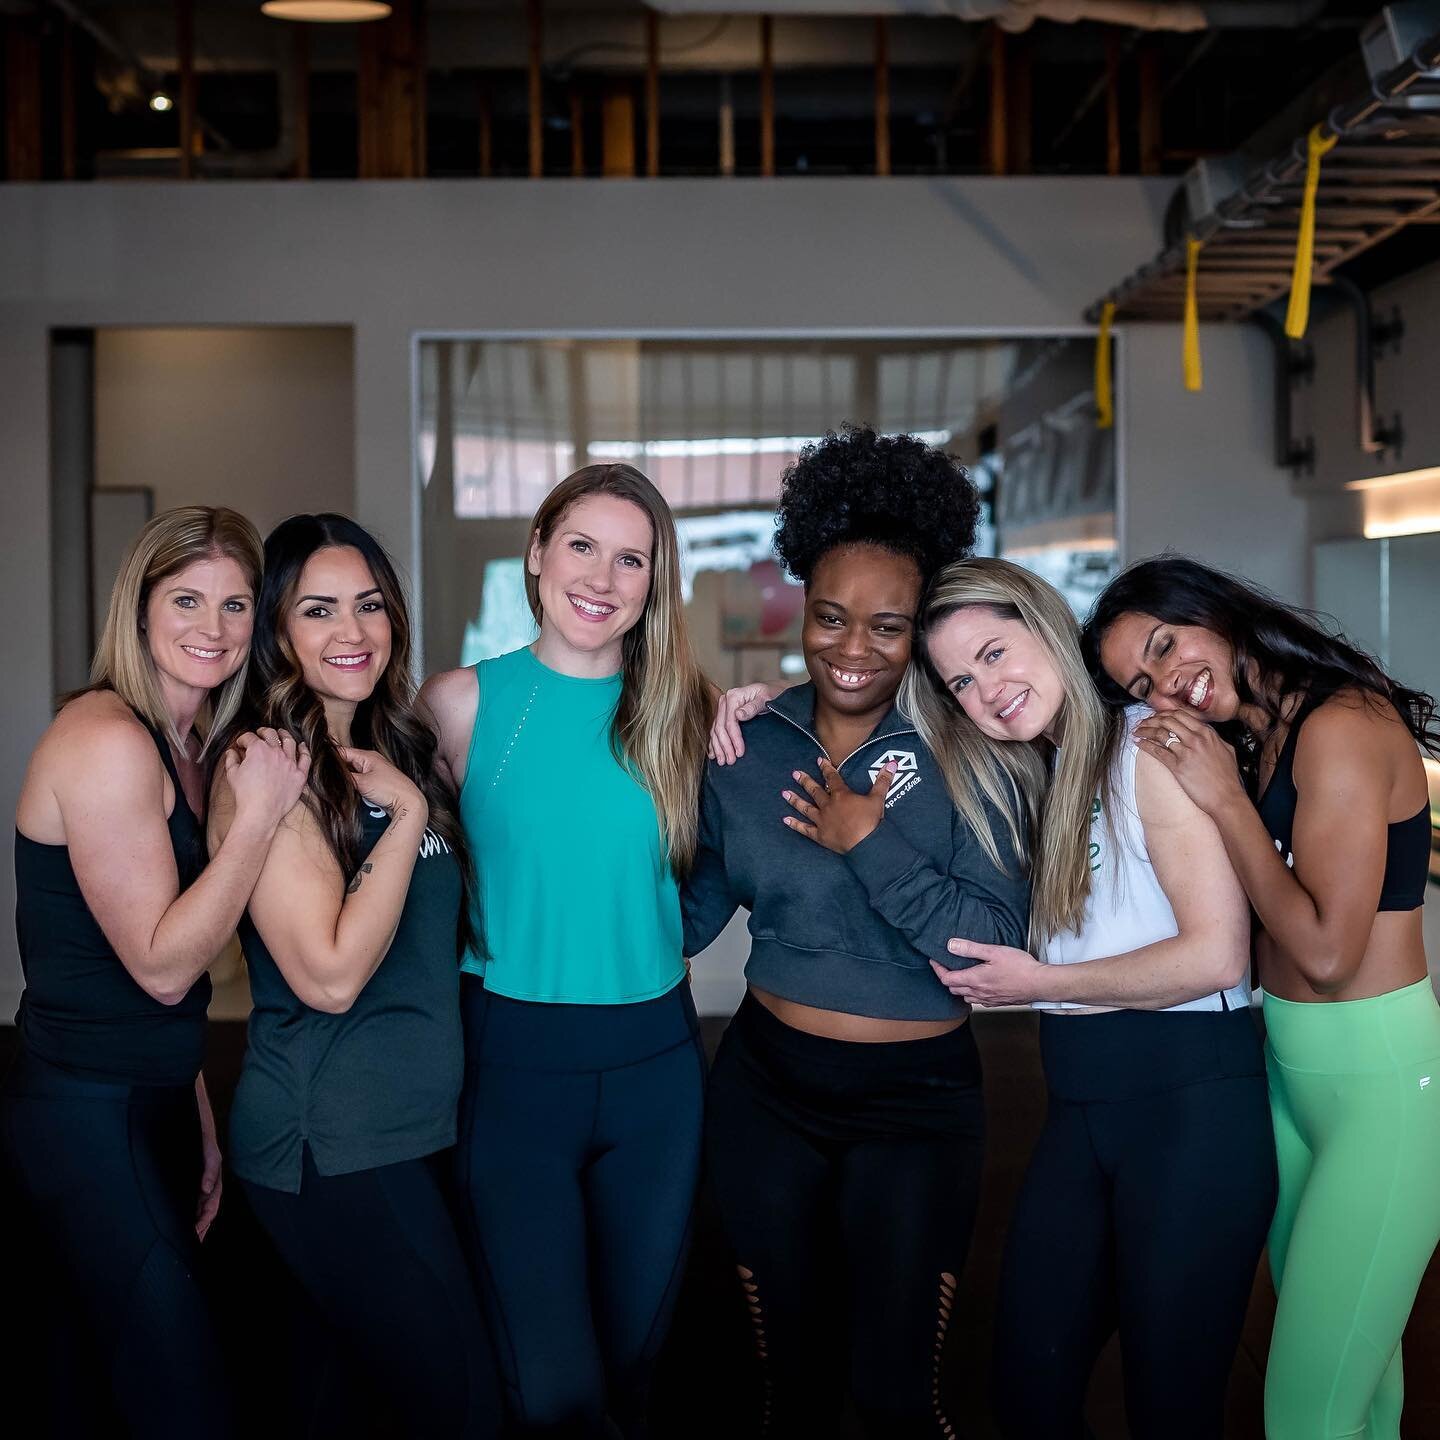 We love our fit fam and we love you, Dayton. We&rsquo;ll see you in class soon 💚
.
.
.
#strength #healthy #barreworkout #selfcaresunday 
#fillyourcup #workoutmotivation #summerfitness #downtowndayton #womenownedbusiness #strongertogether